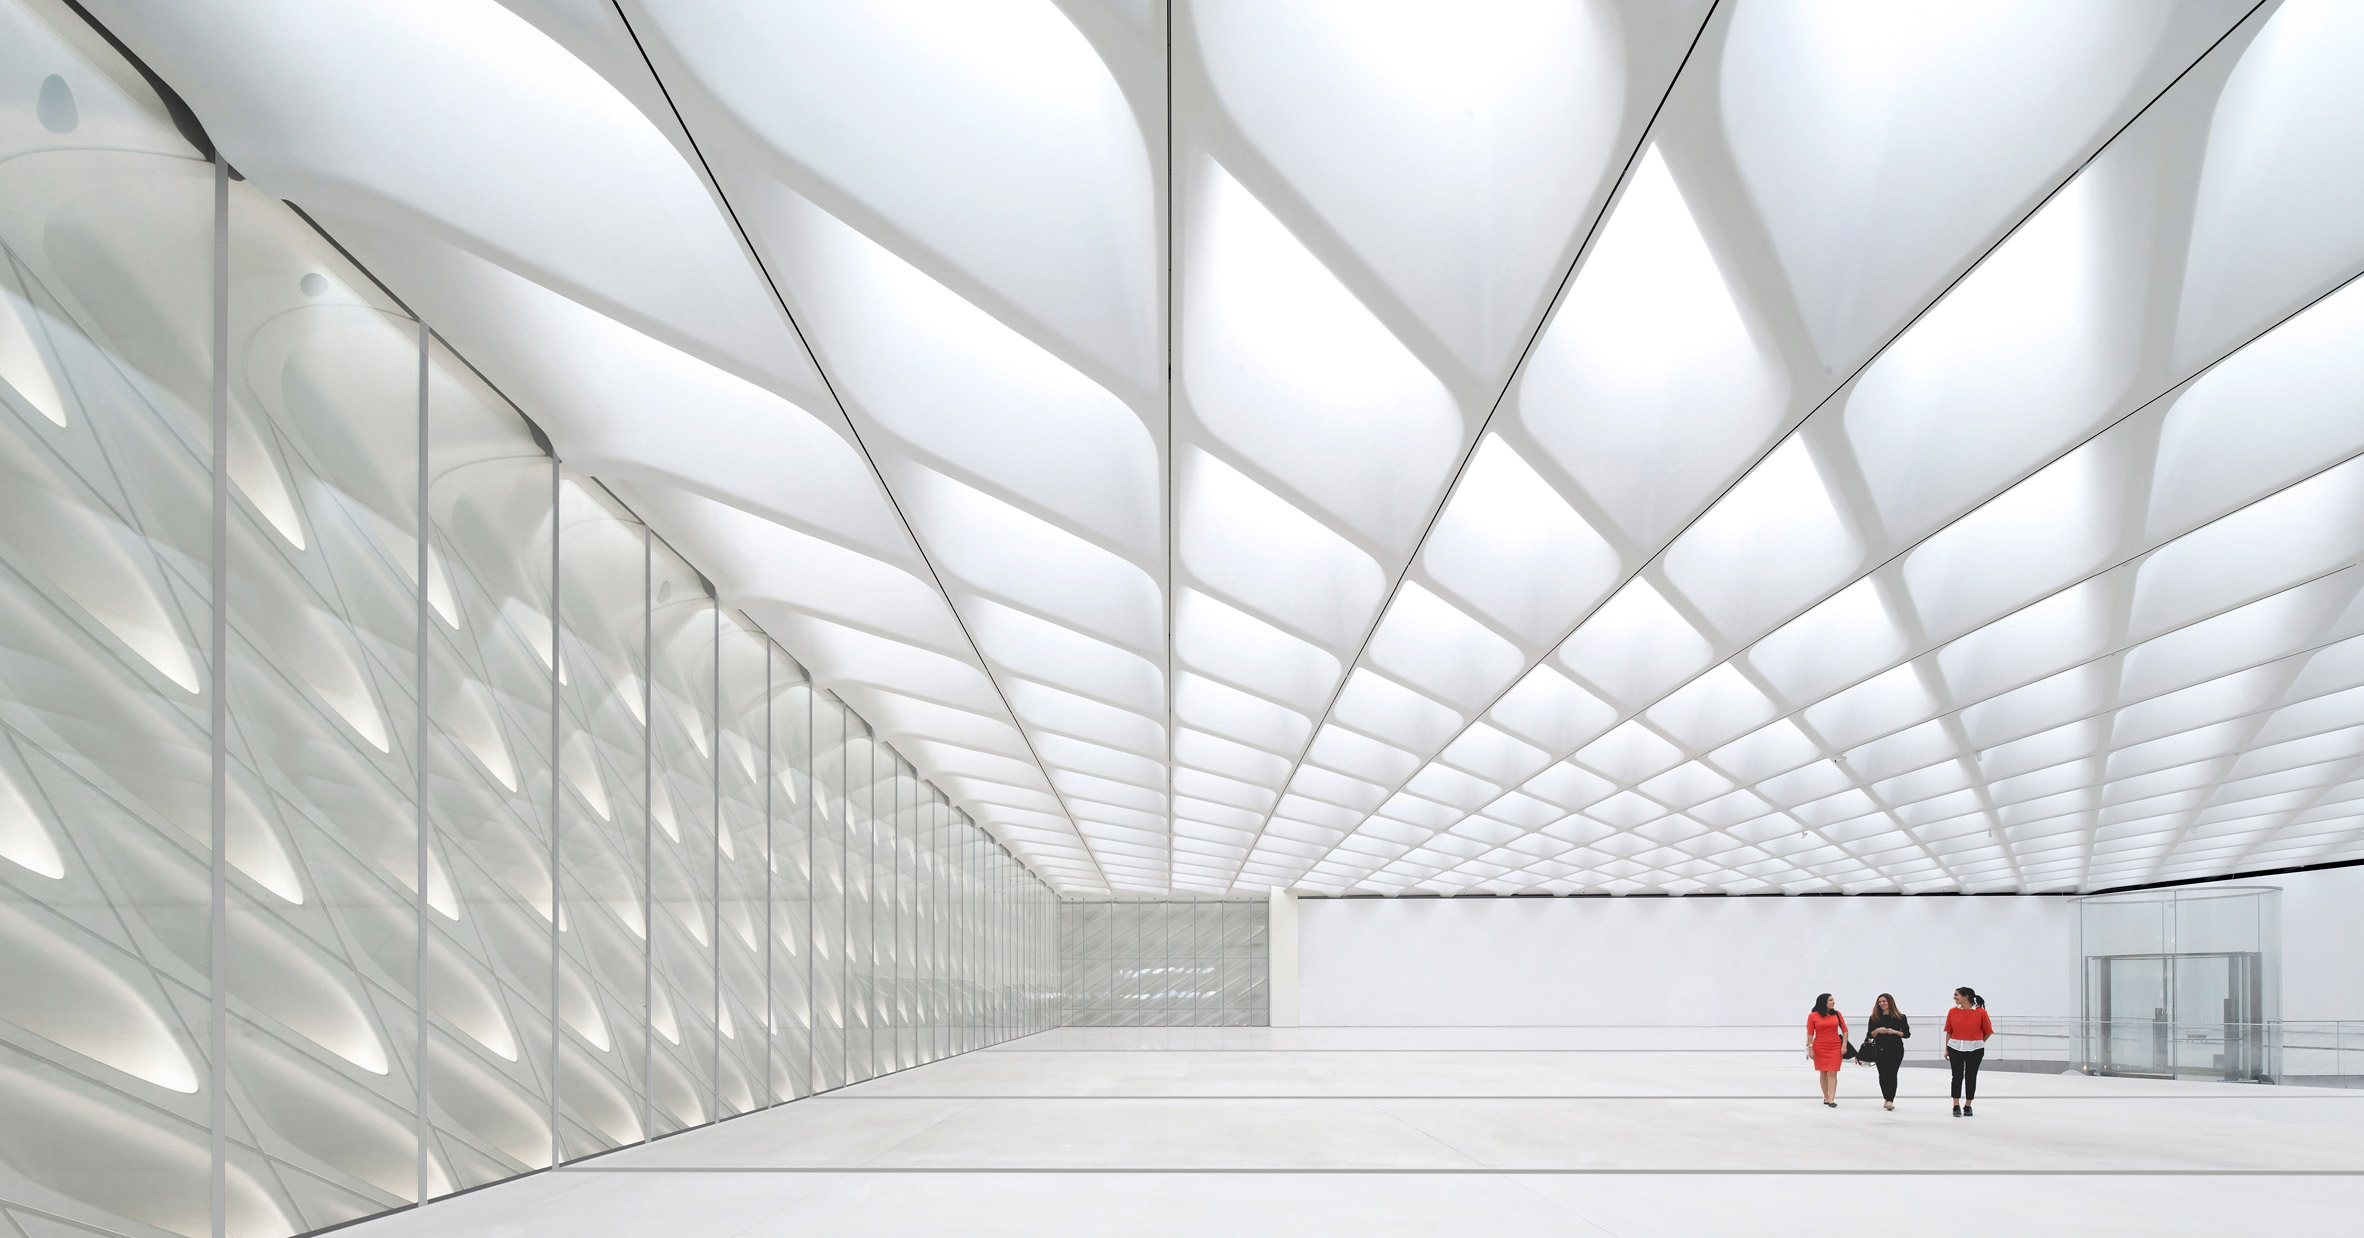 Gallery space flooded with light coming in through the perforated ceiling and walls